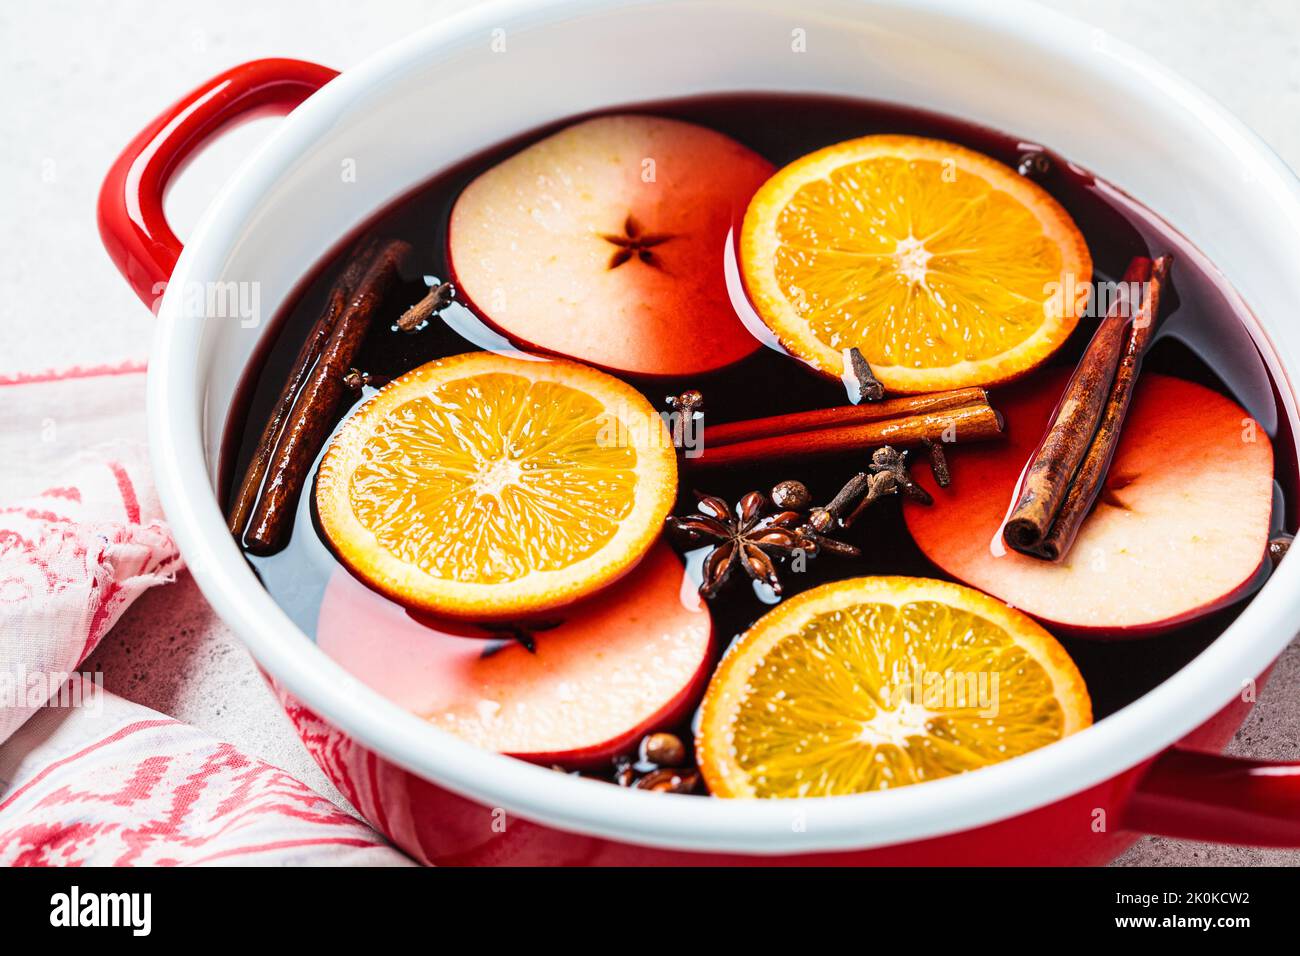 Mulled wine with orange, apple and spices in a red saucepan, gray background. Autumn or winter cozy drink. Stock Photo